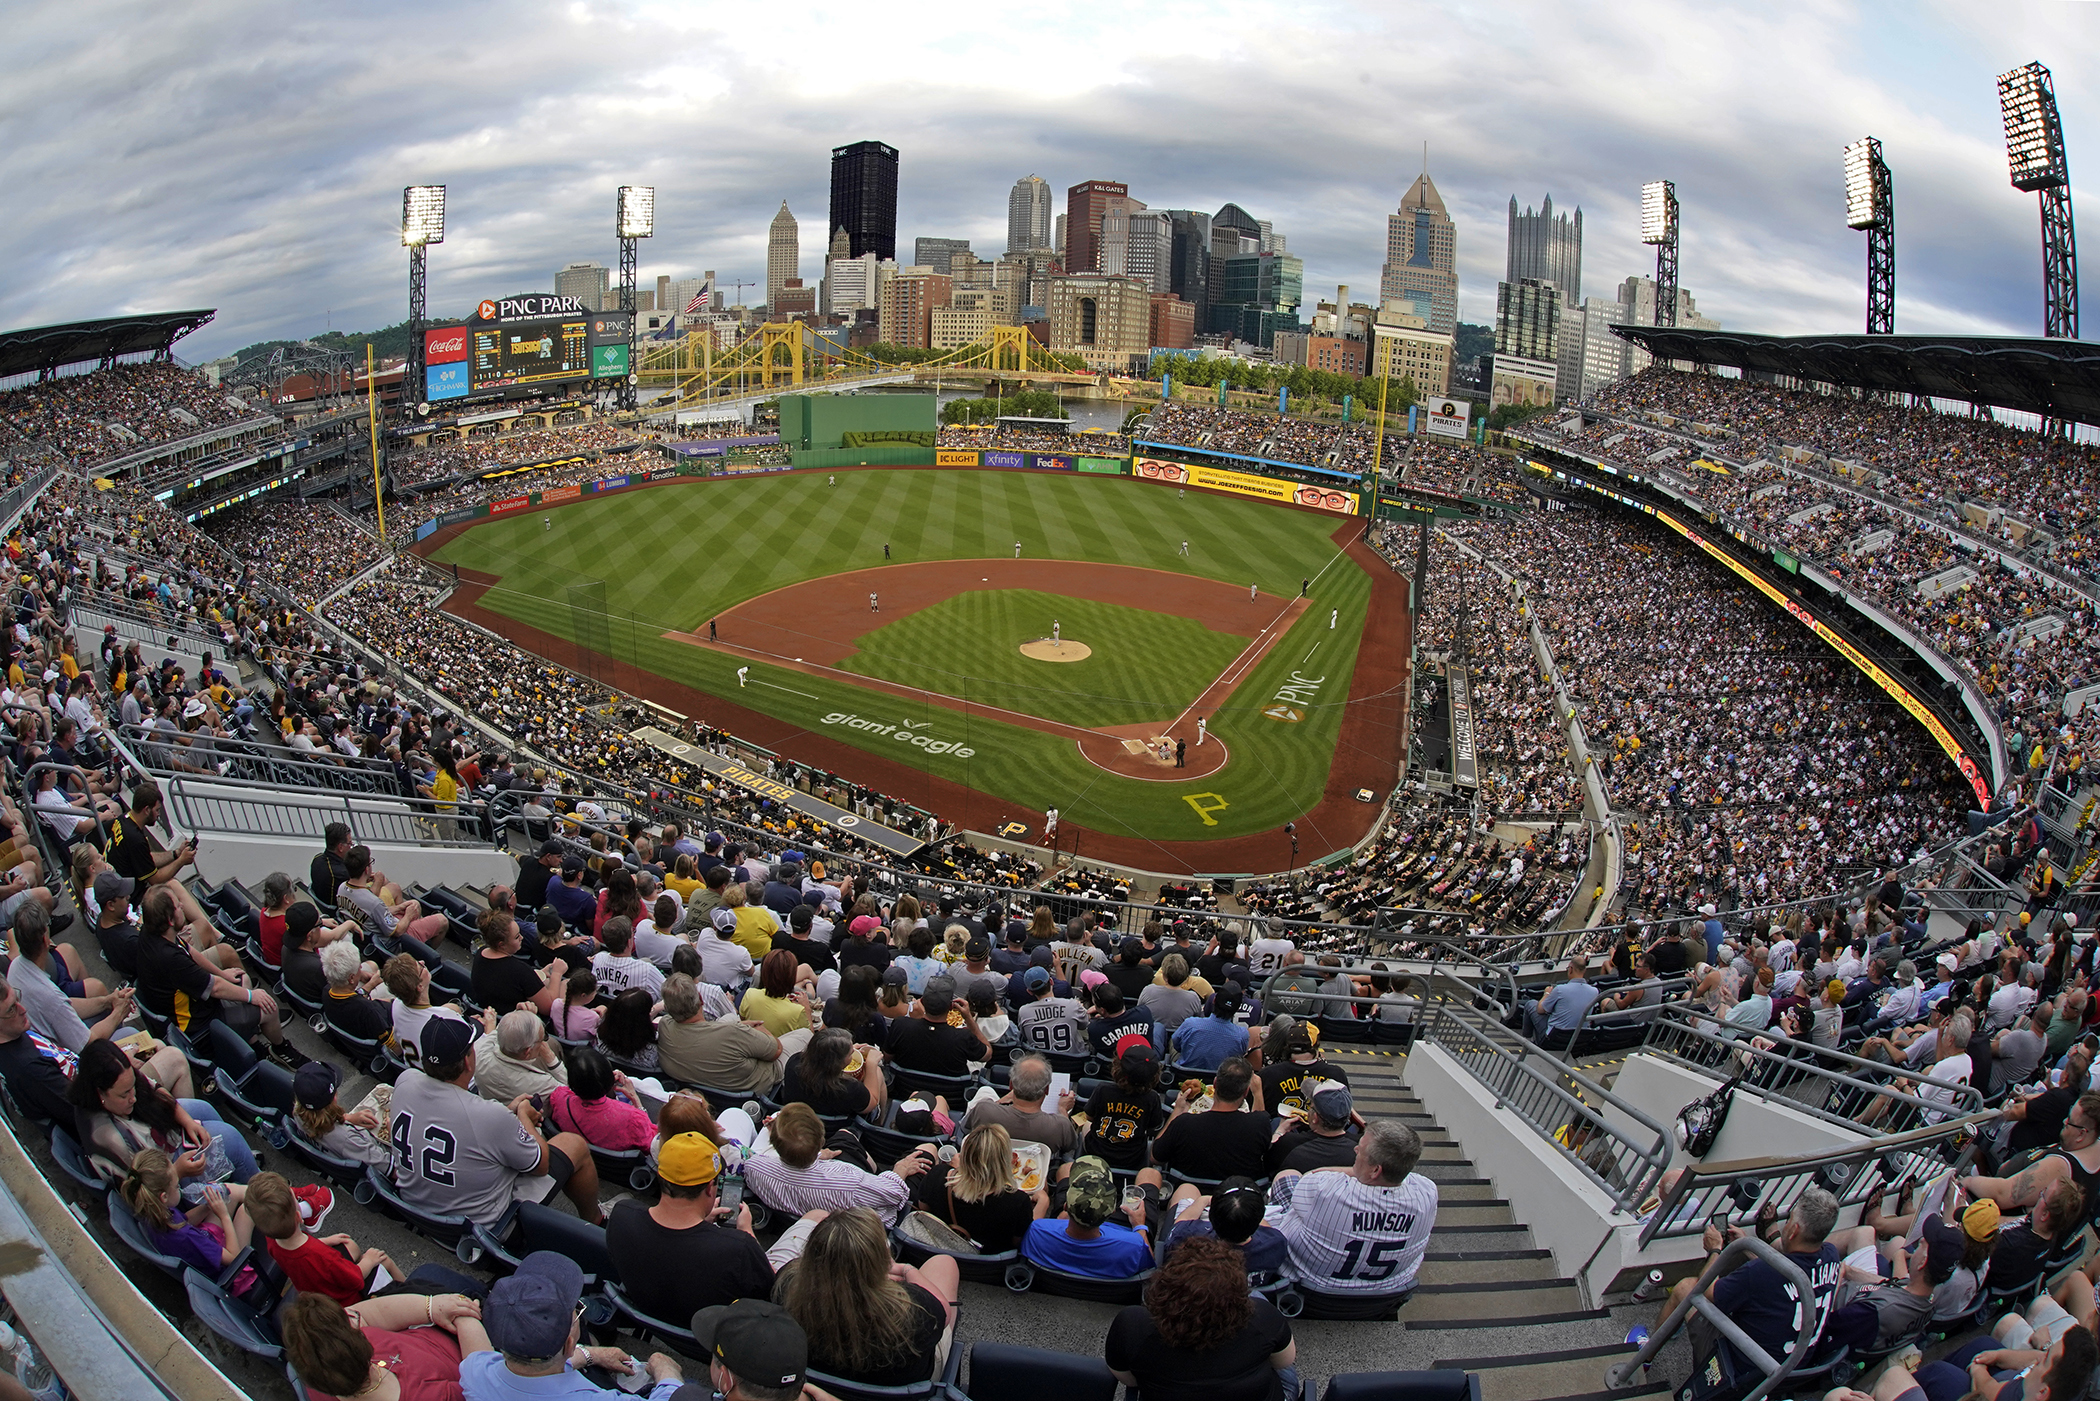 Bigger scoreboard at PNC Park to be financed by surcharge on tickets 